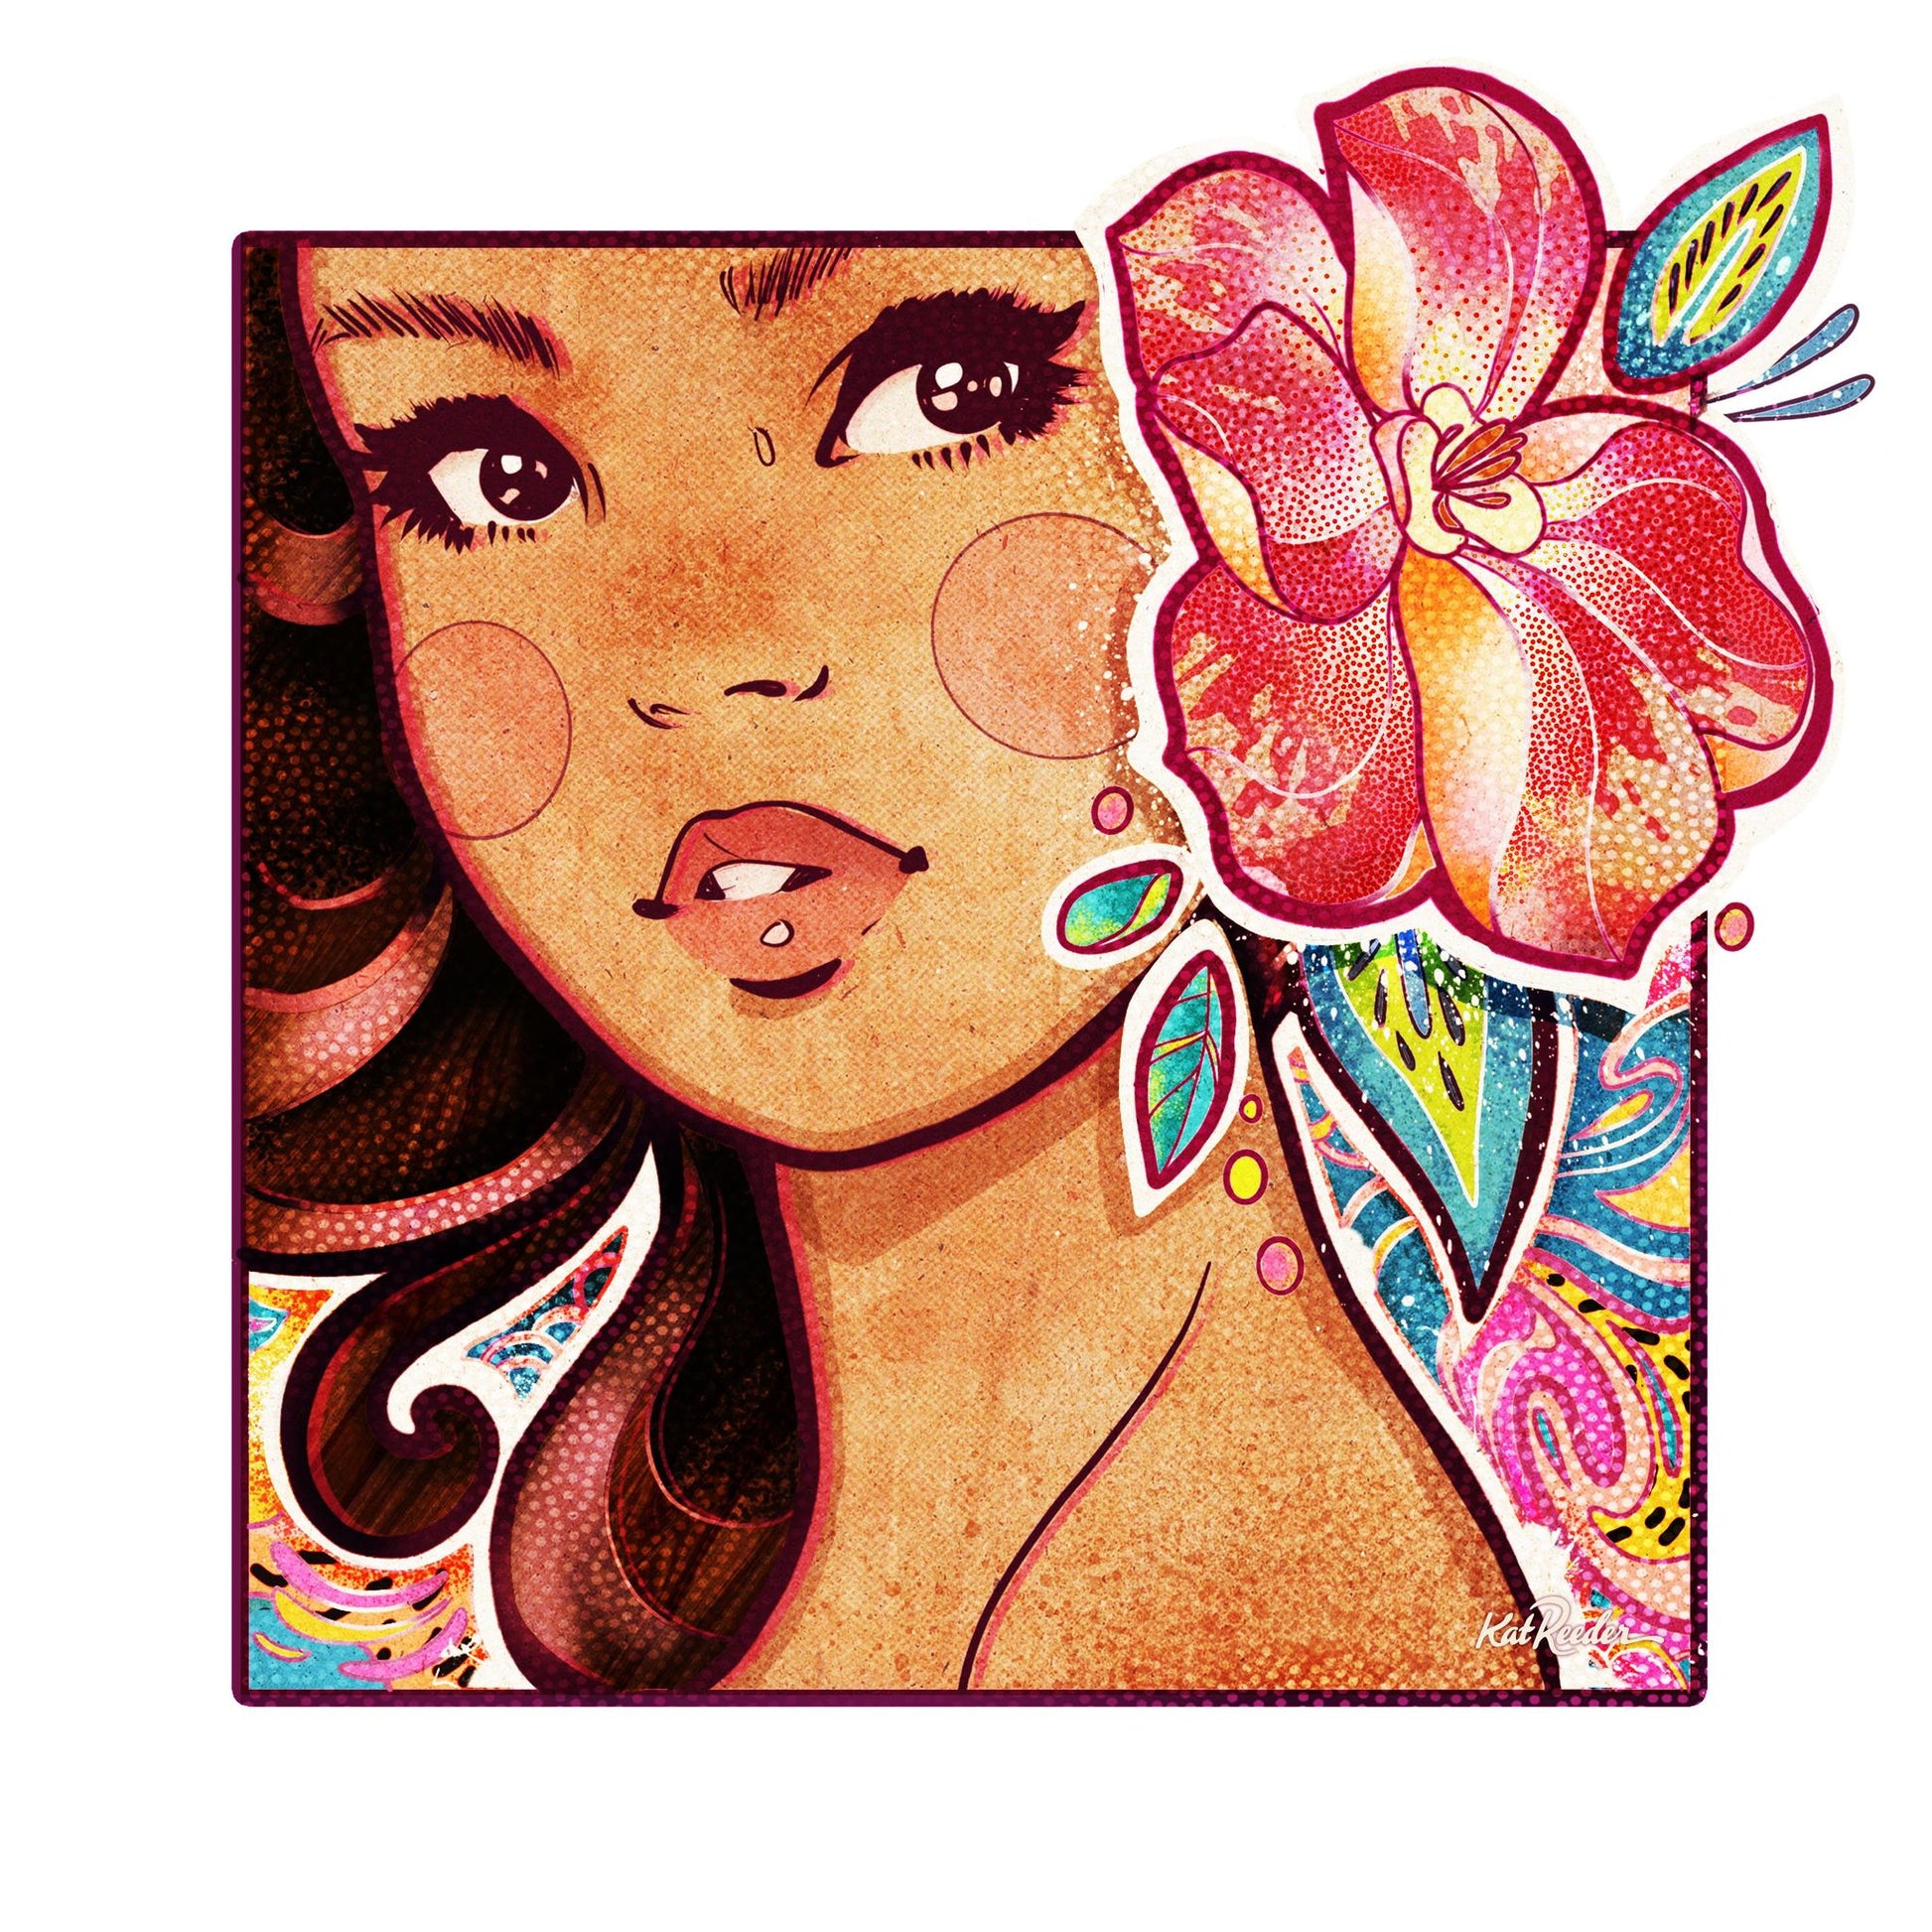 retro style illustration of a dark haired island girl with big bold eyes and a large flower in her hair, surrounded by psychedelic swirls and a white frame in the style of 1960s pop art